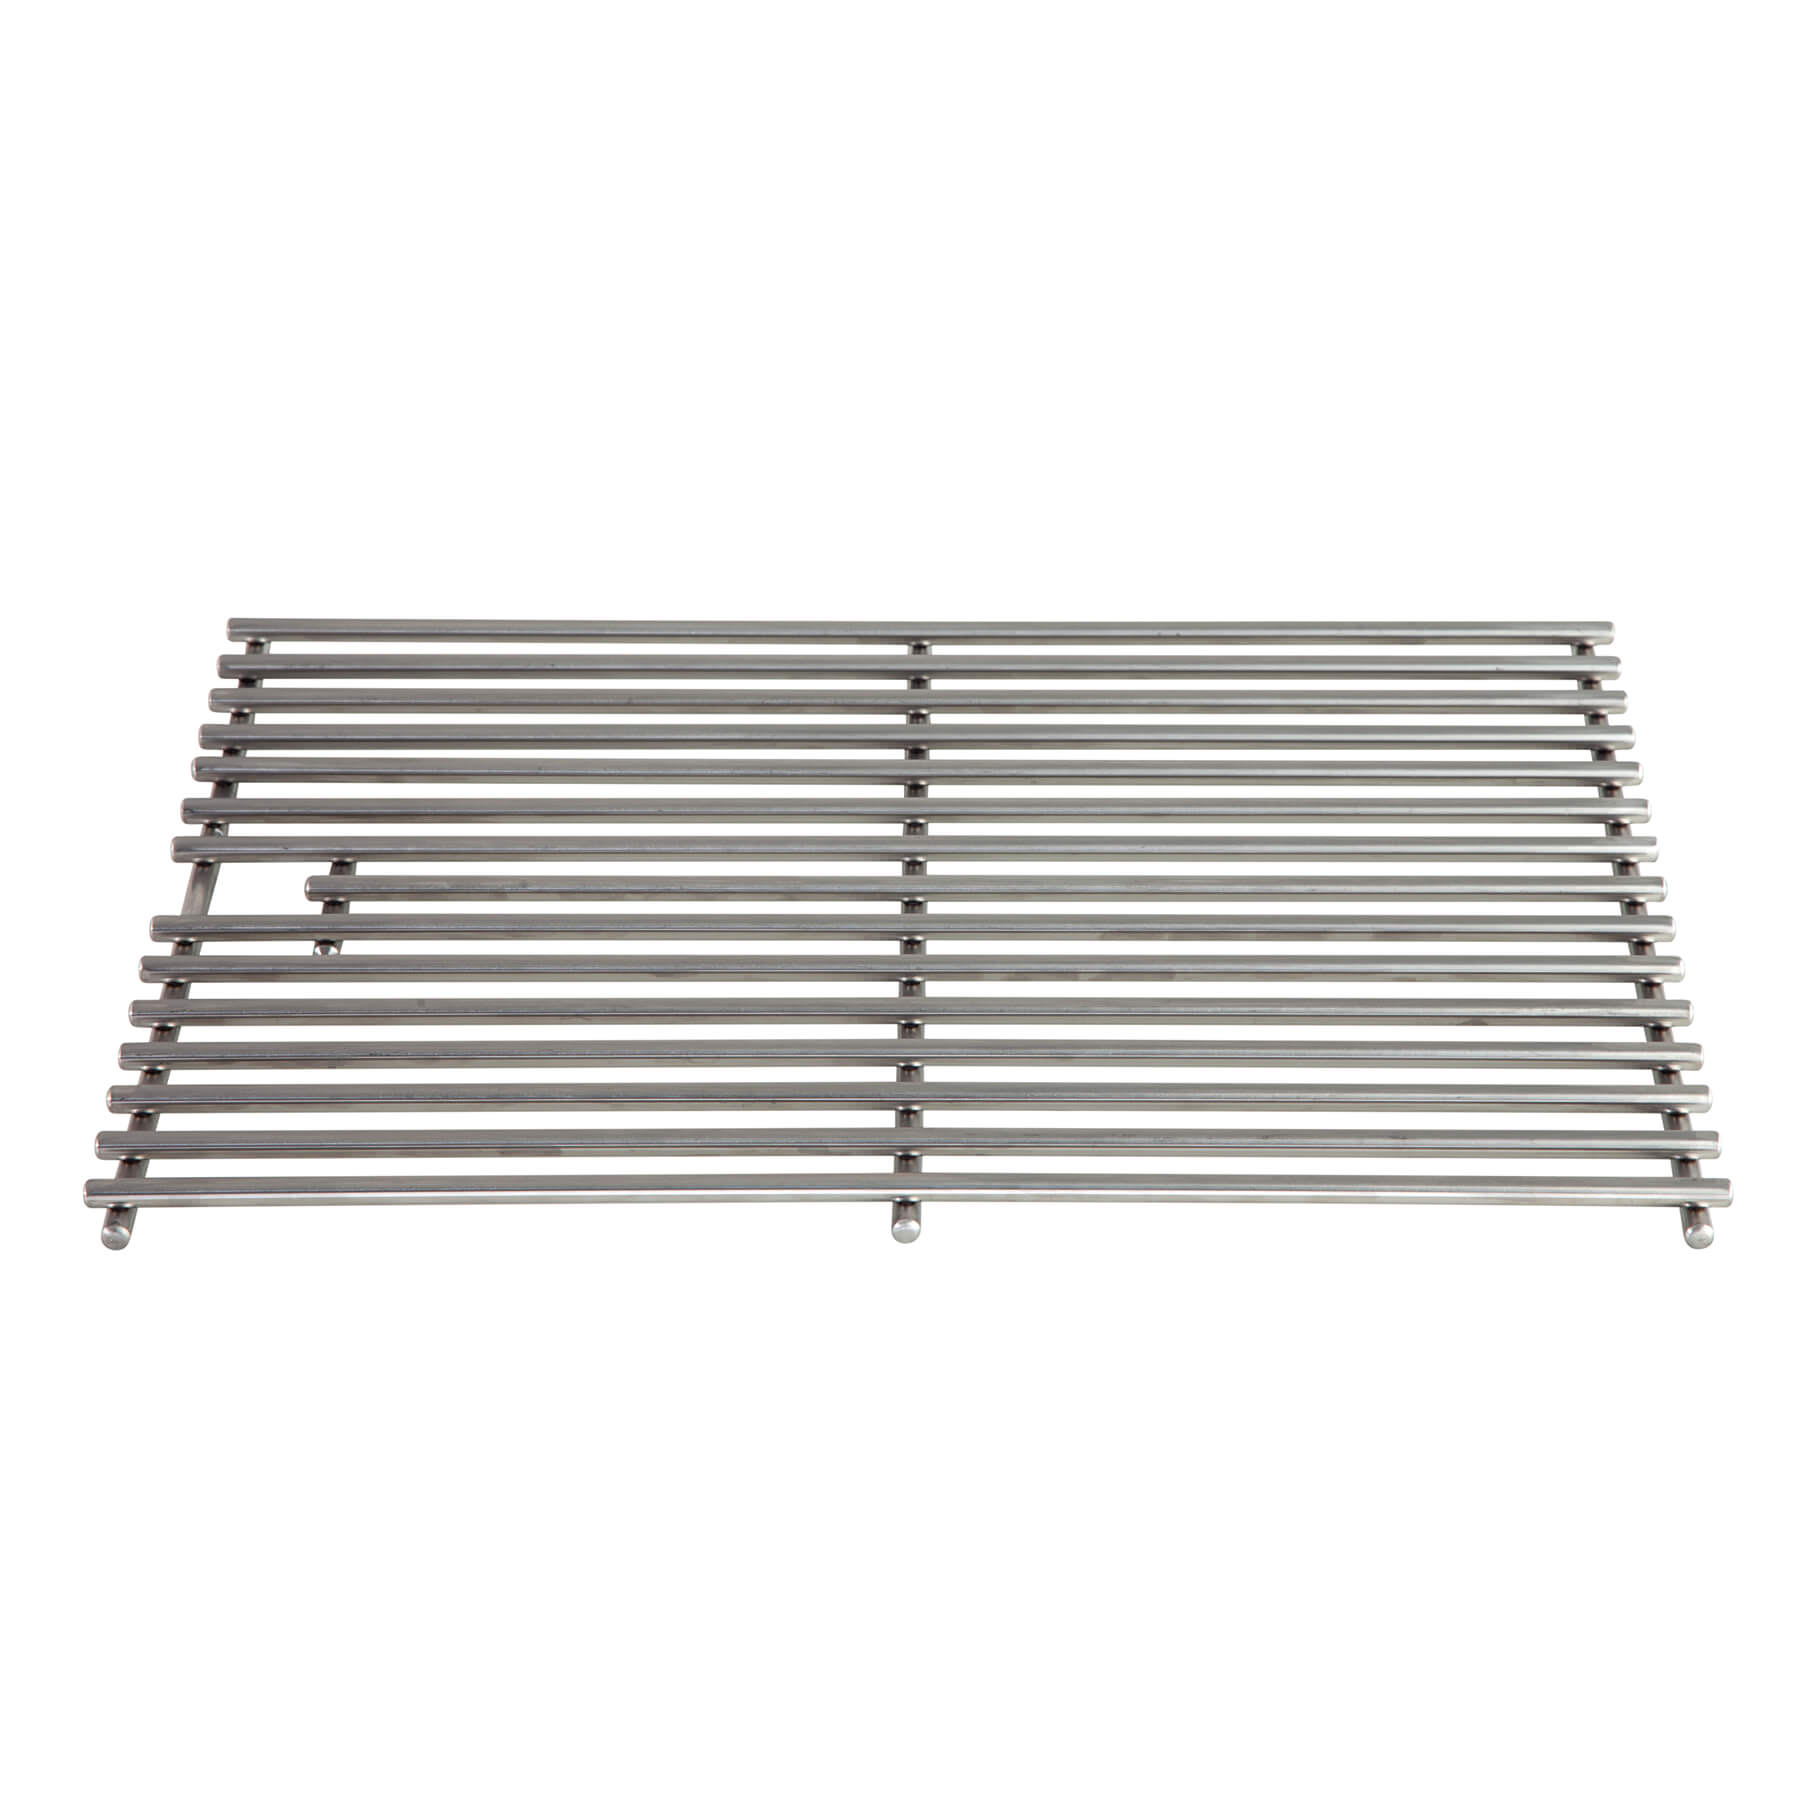 ALL’GRILL Edelstahlrost 5mm 15x46cm für Chef S